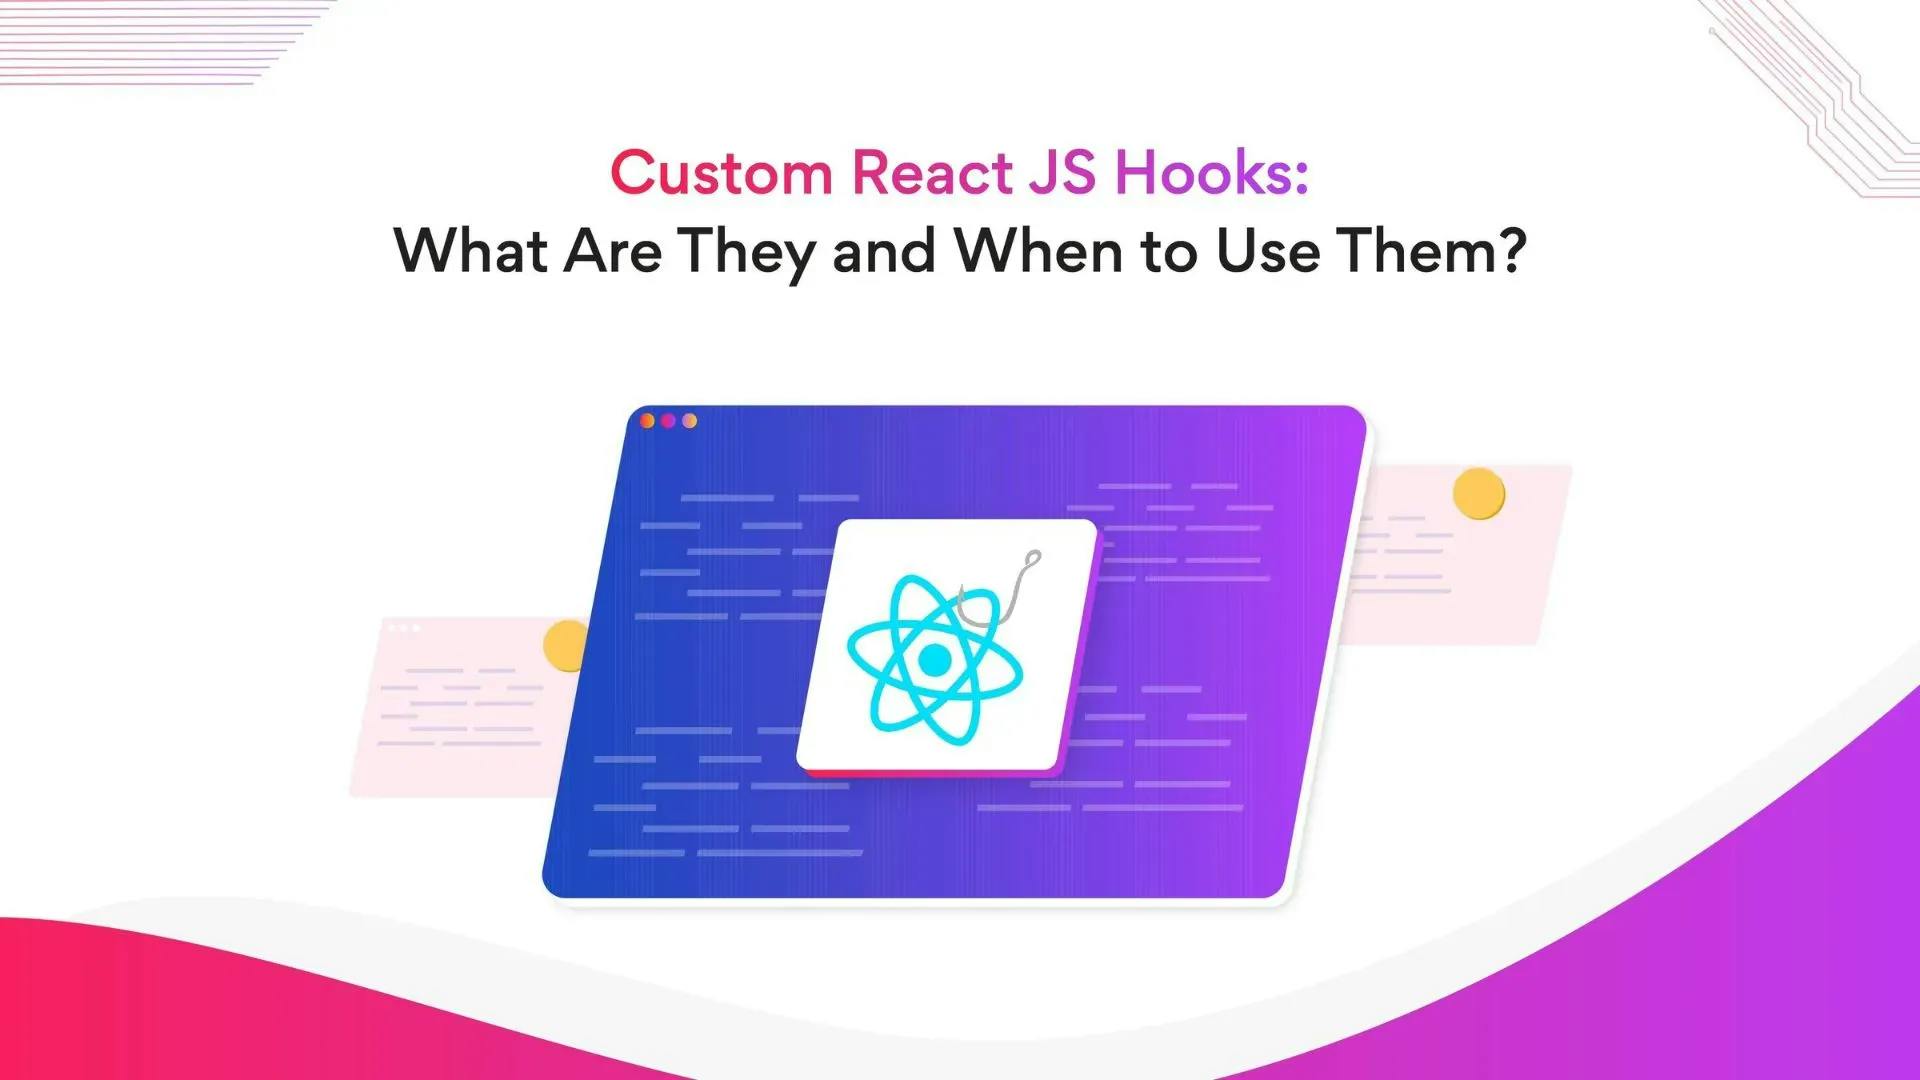 Custom React JS Hooks: What Are They and When to Use Them?